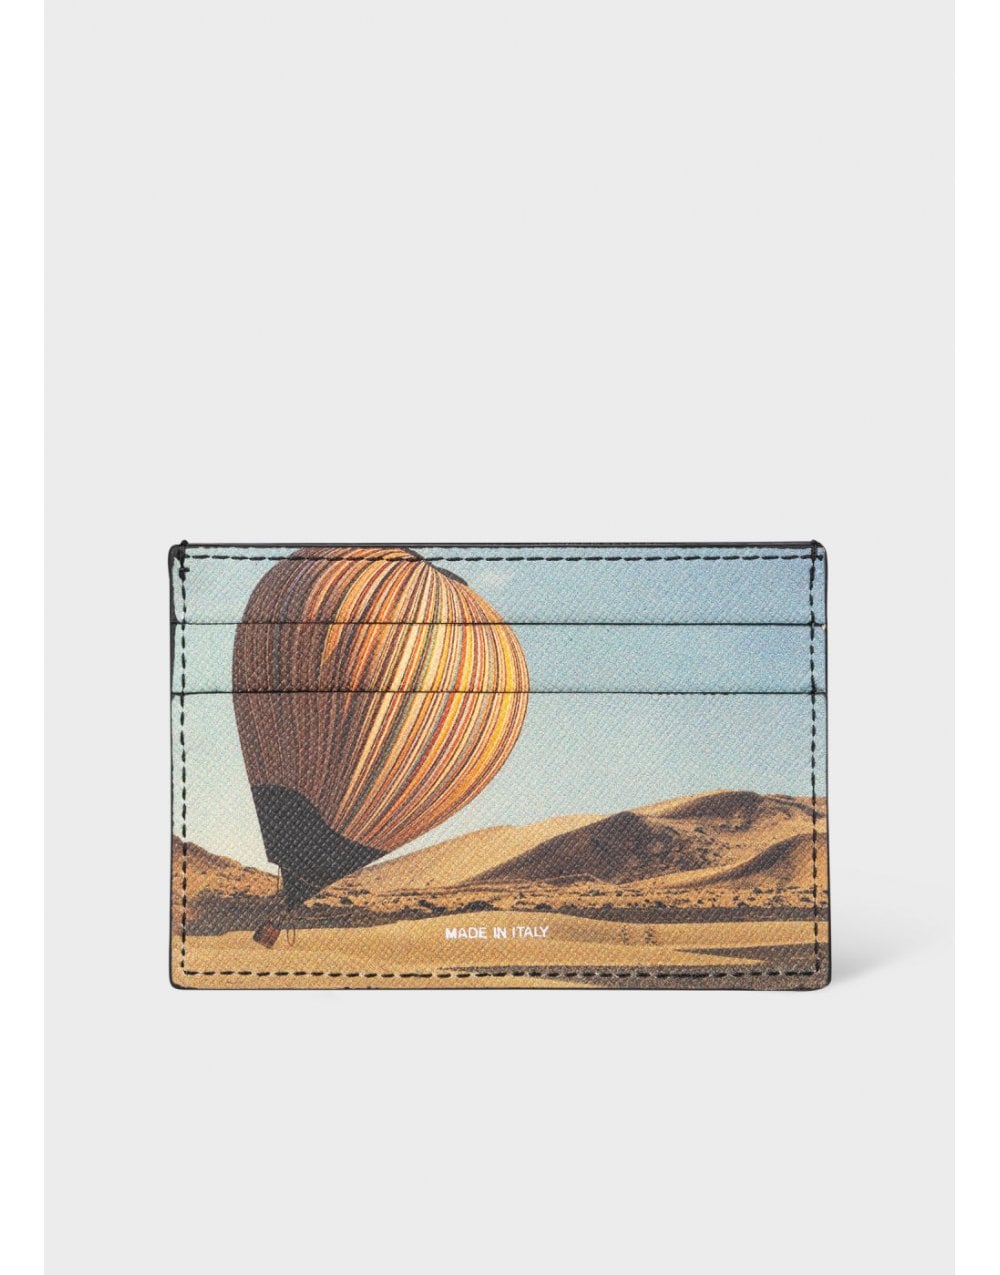 Paul Smith Paul Smith Hot Air Balloon Graphic Card Holder Col: 79 Black, Size: Os